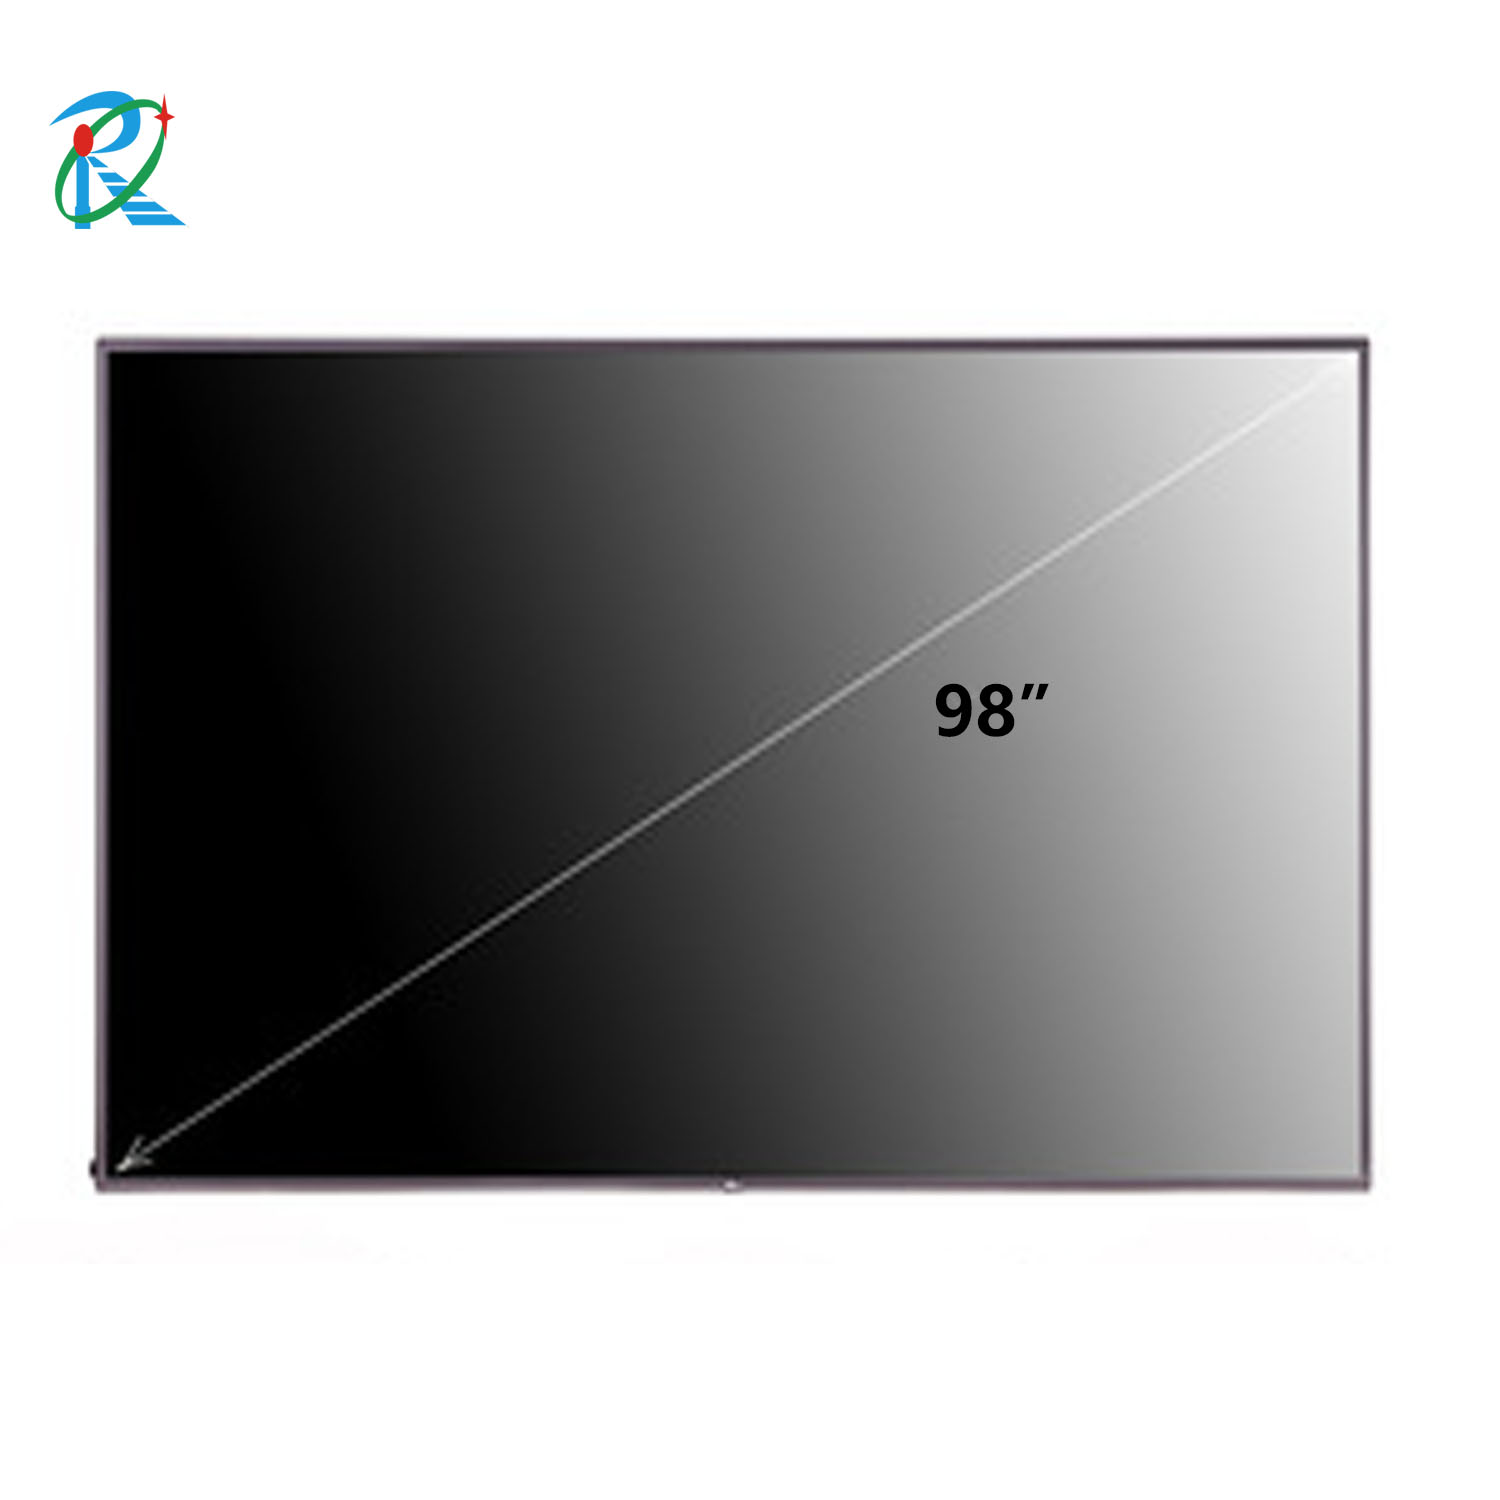 98 inch 3840x2160 Pixel 2500 nits UFHD outdoor advertising display lcd monitor